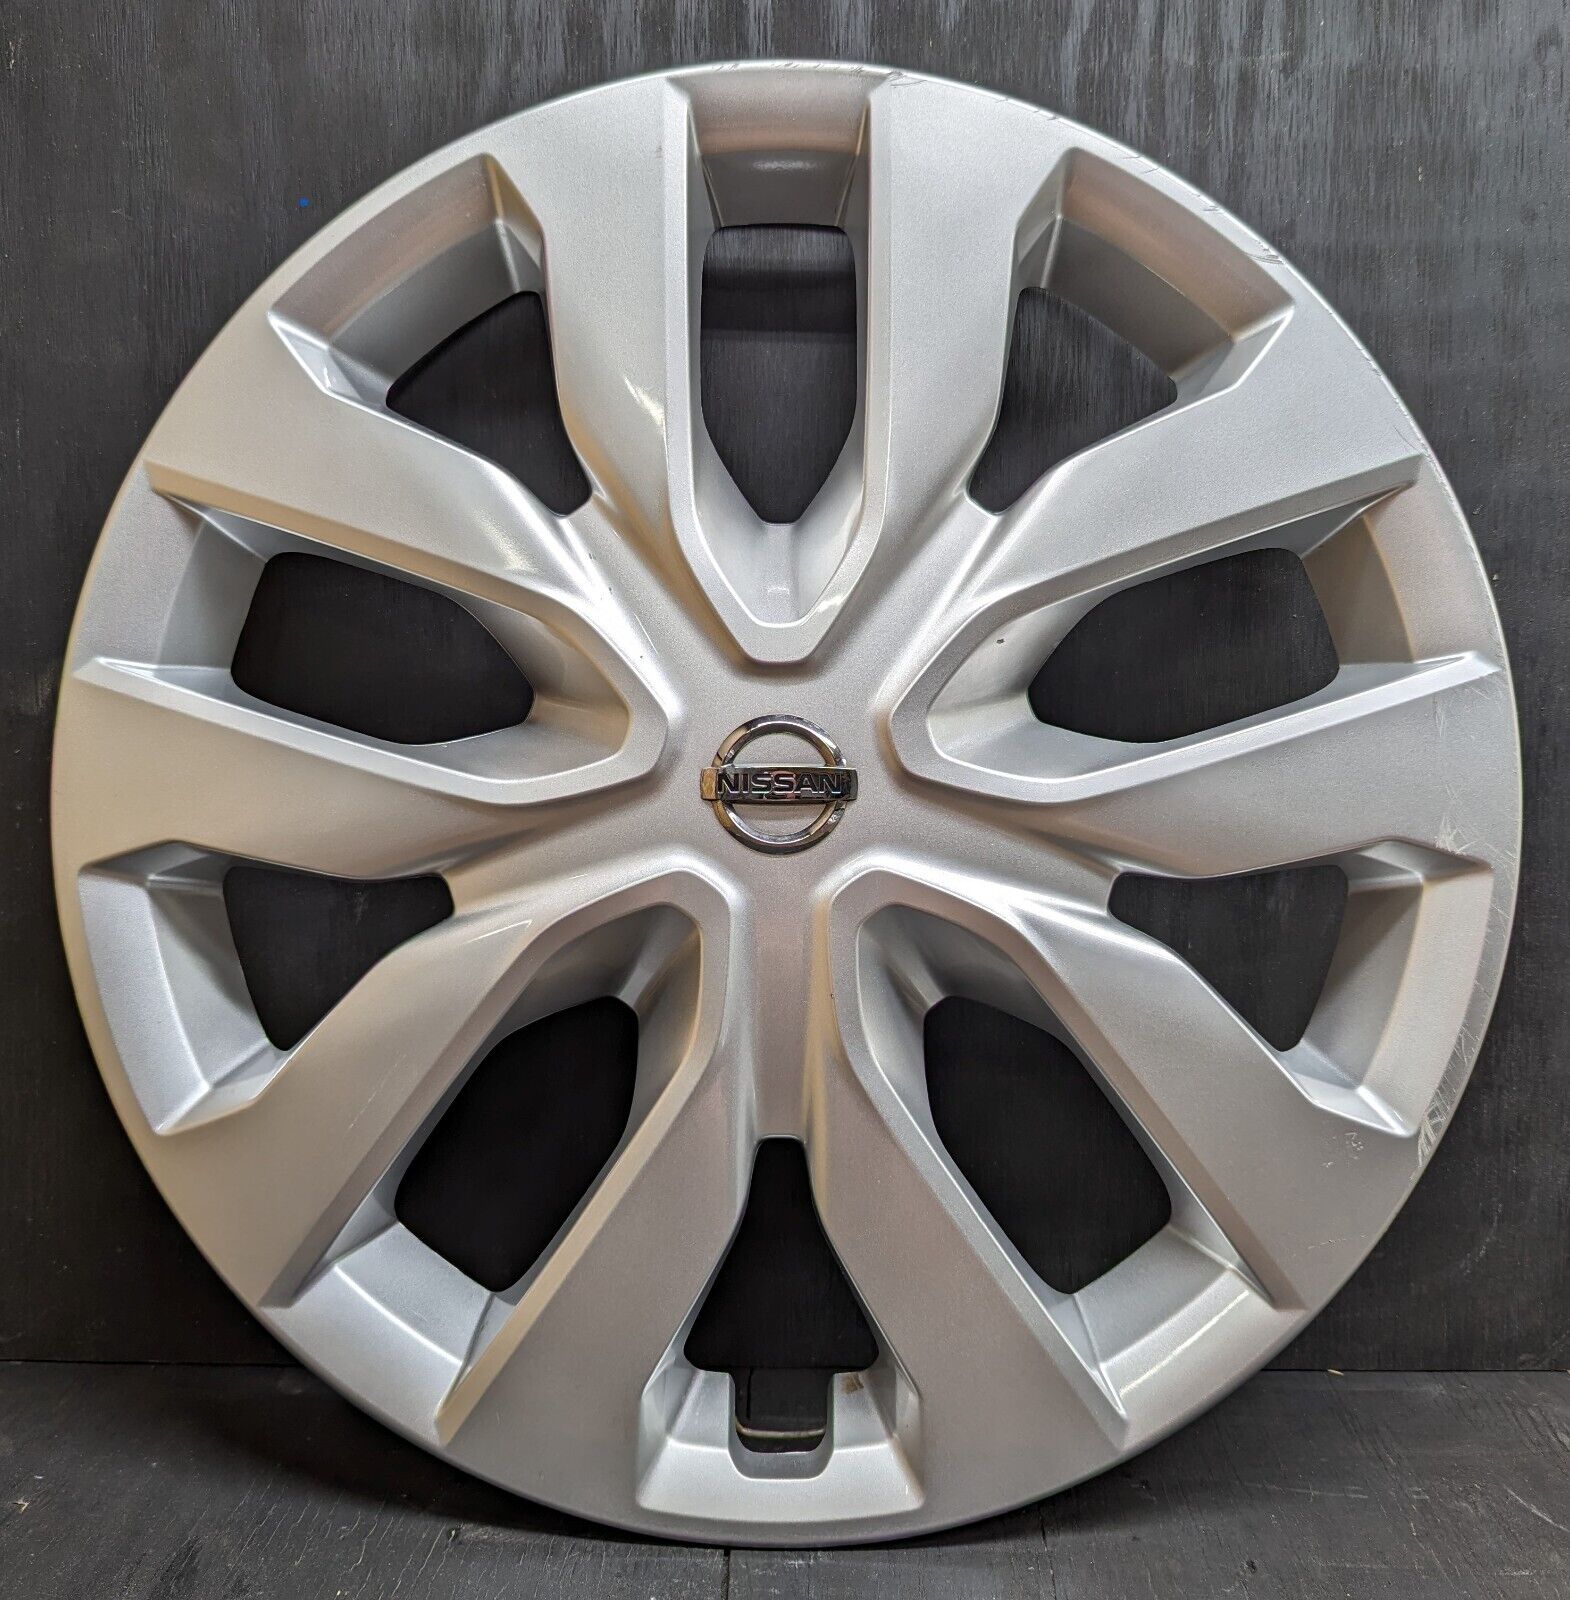 USED Nissan Rogue OEM Hubcap 17 53092MD 2014 2015 2016 2017 2018 2019 2020 Rouge